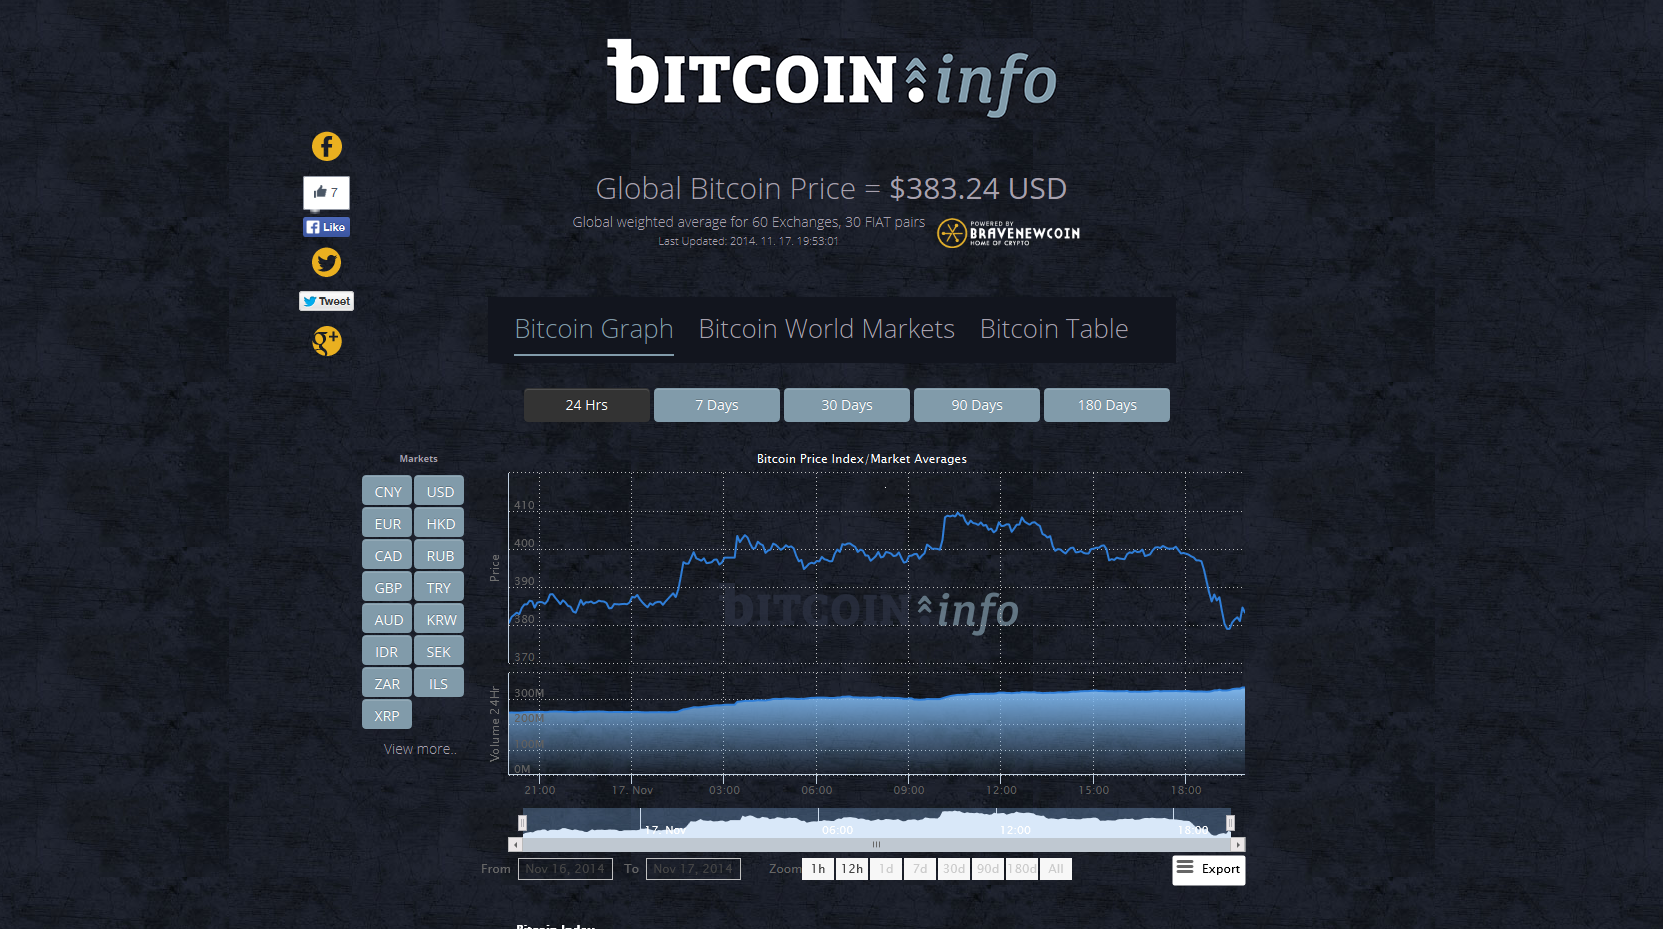 Bitcoin.info launched